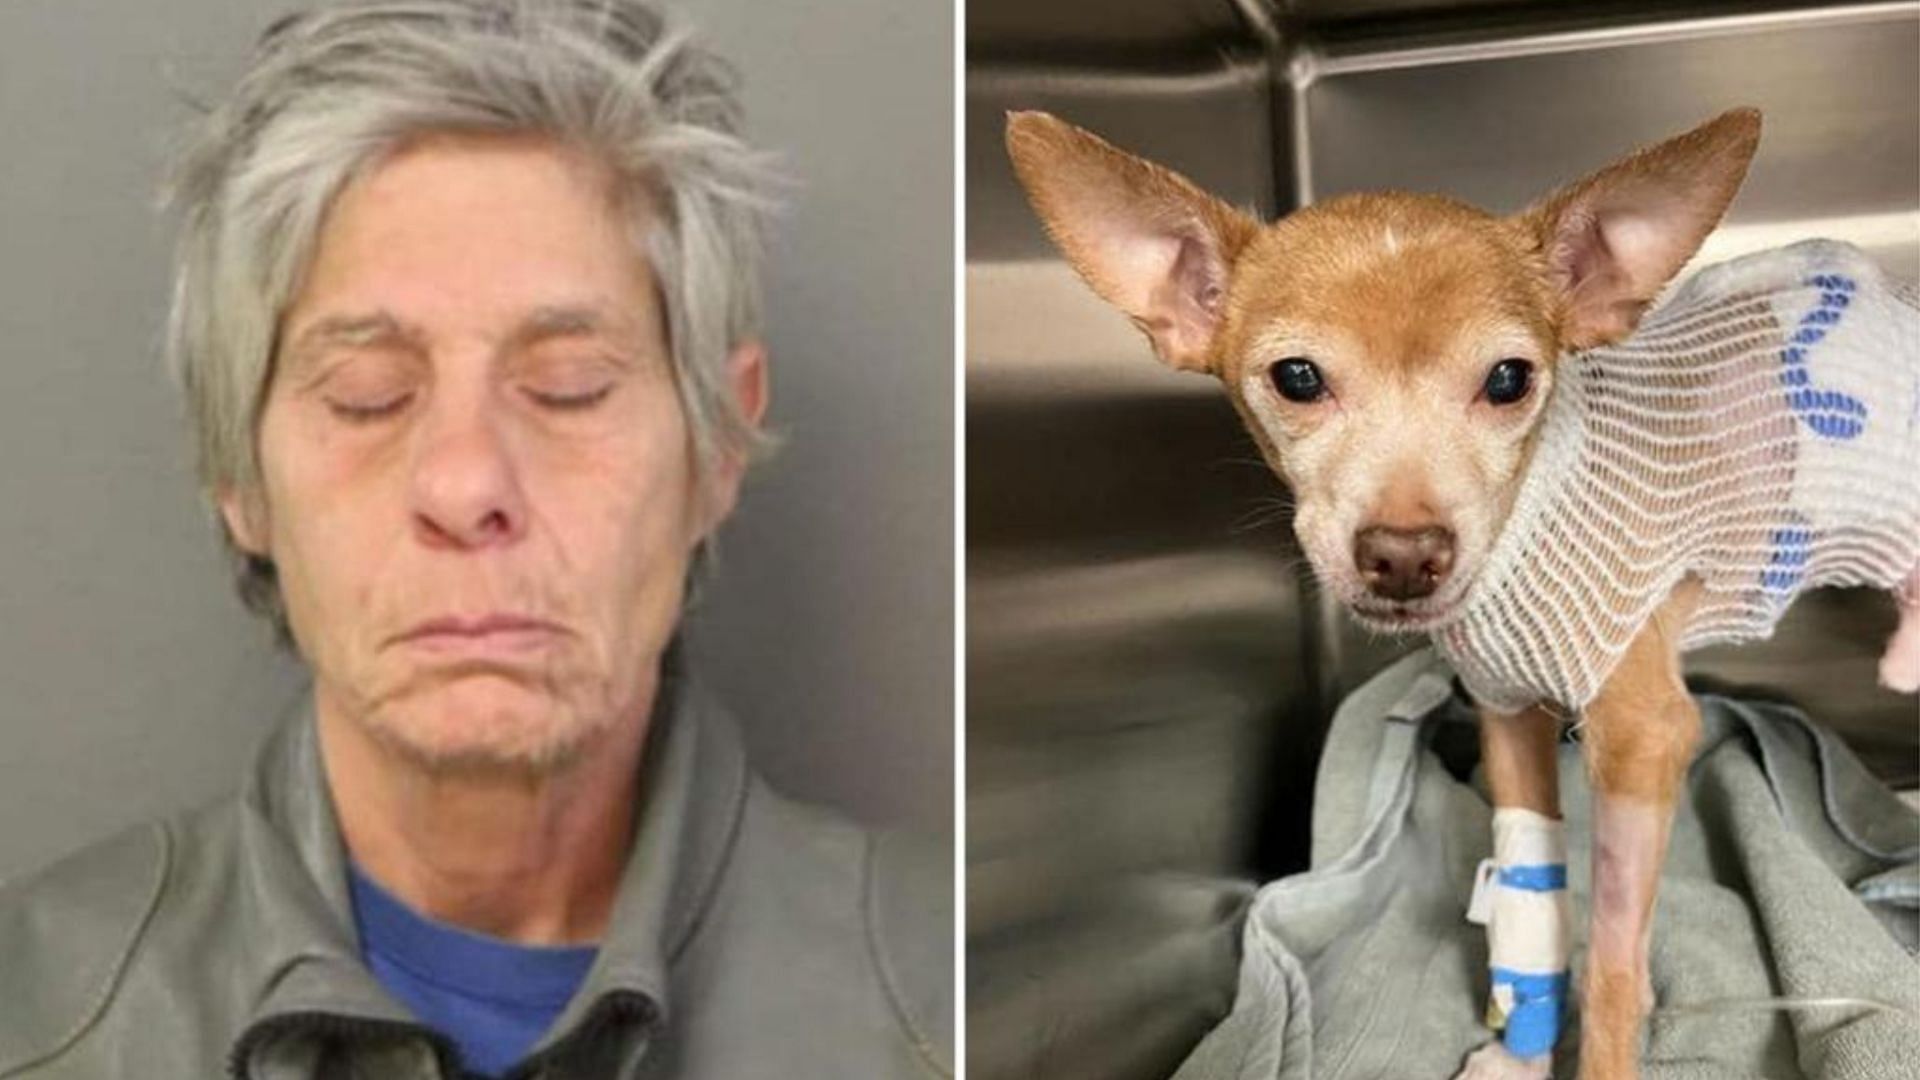 61-year-old Jeanette Olivo was arrested for stabbing a Chihuahua dog multiple times (Images via Chicago Police Department/Garrido Stray Rescue Foundation)